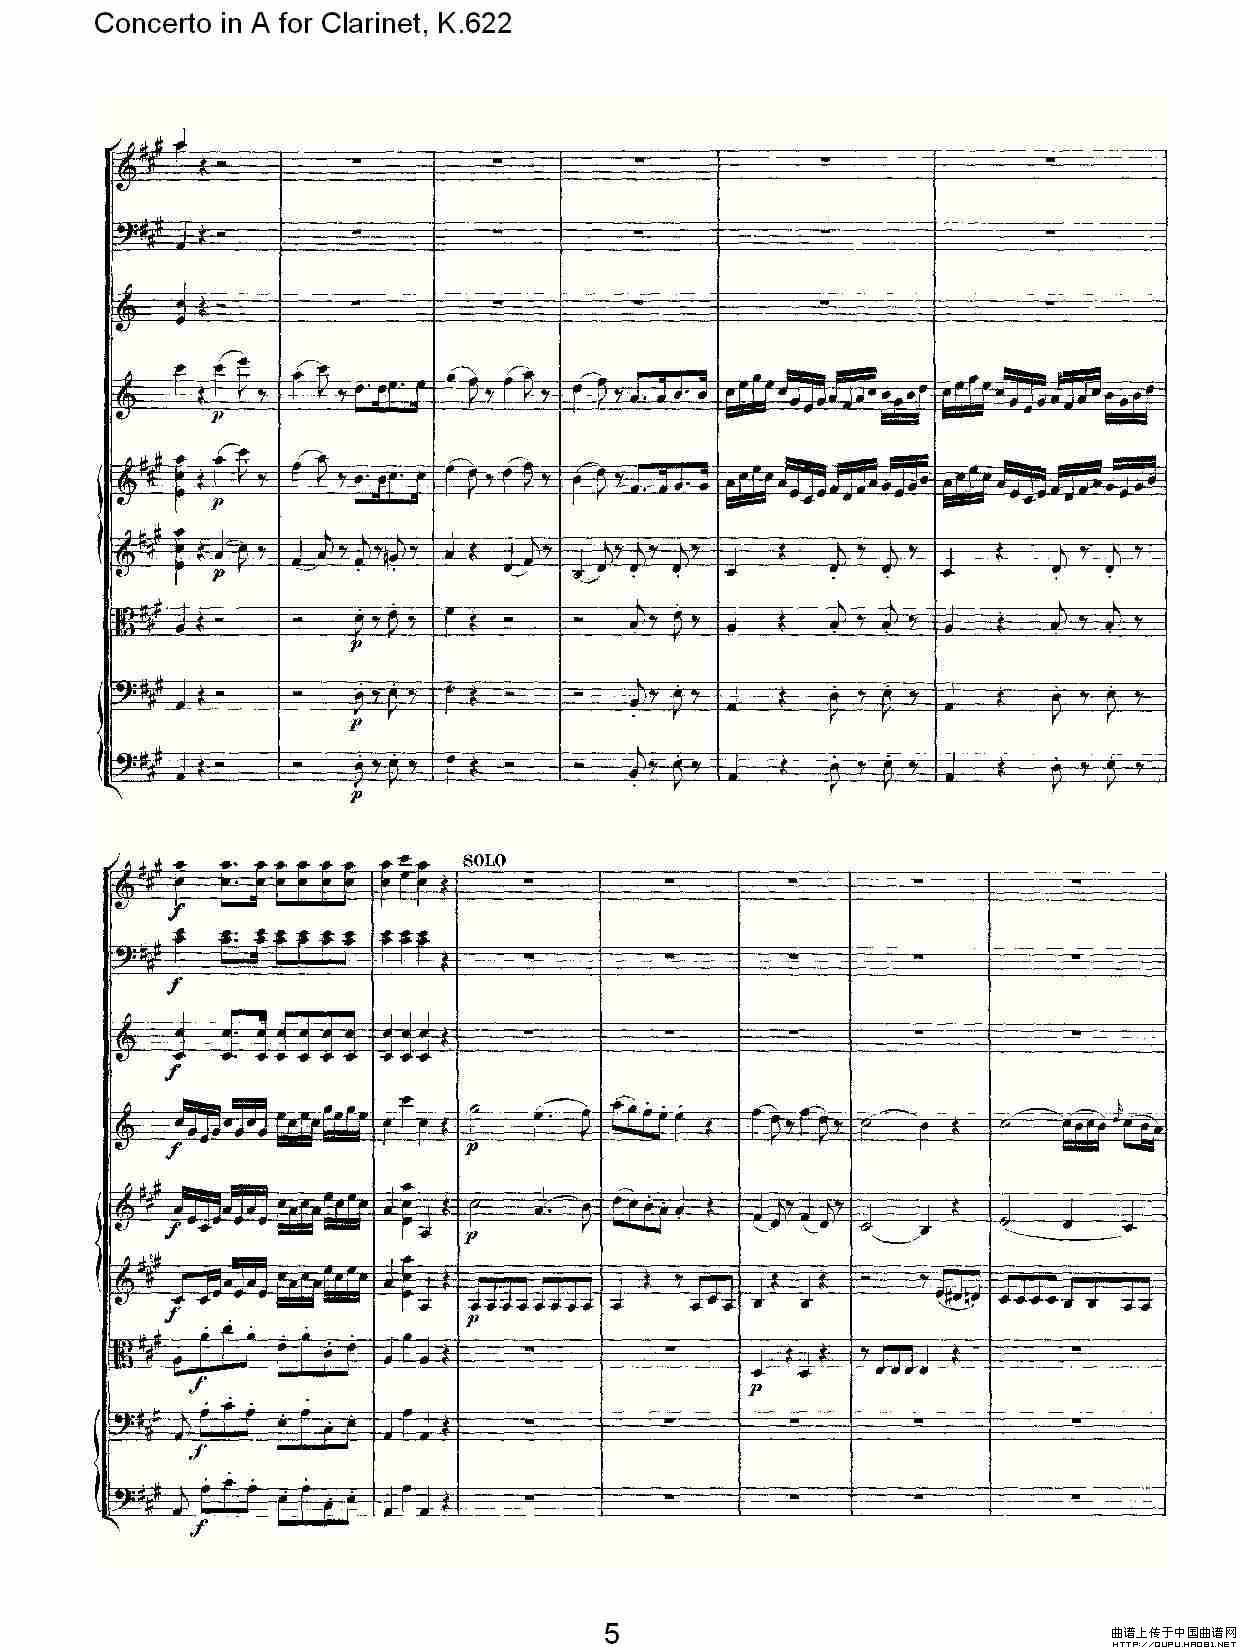 Concerto in A for Clarinet, K.622（A调单簧管协奏曲, K